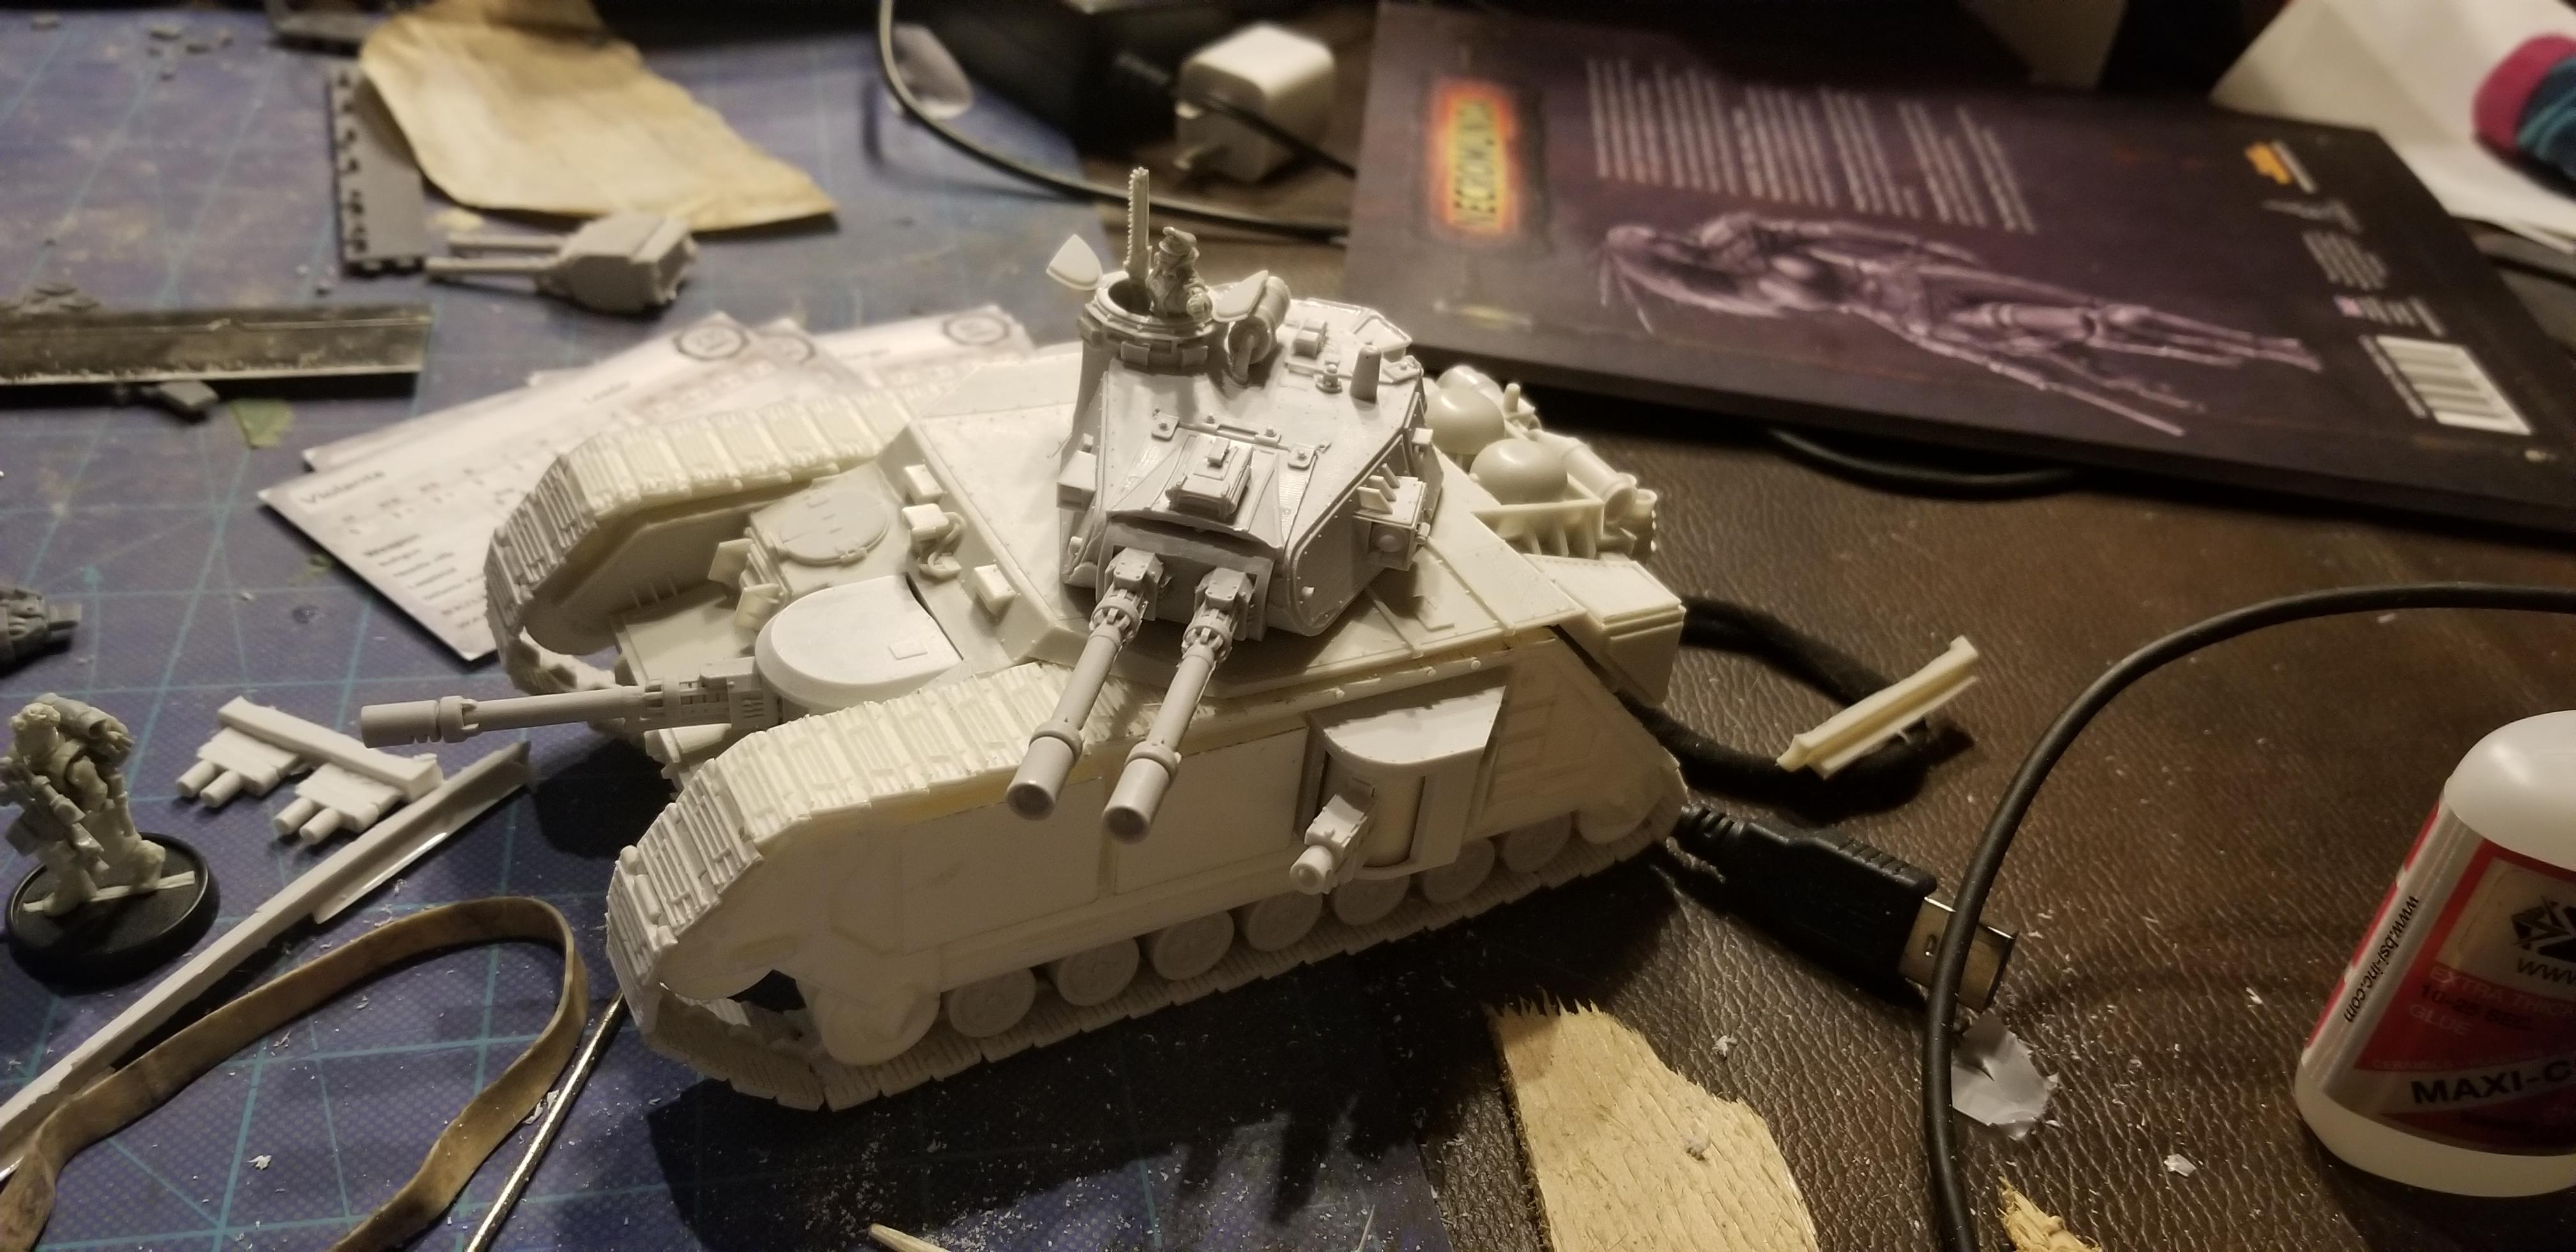 So I backed the Mortian Heavy Battle tanks and got this assembled